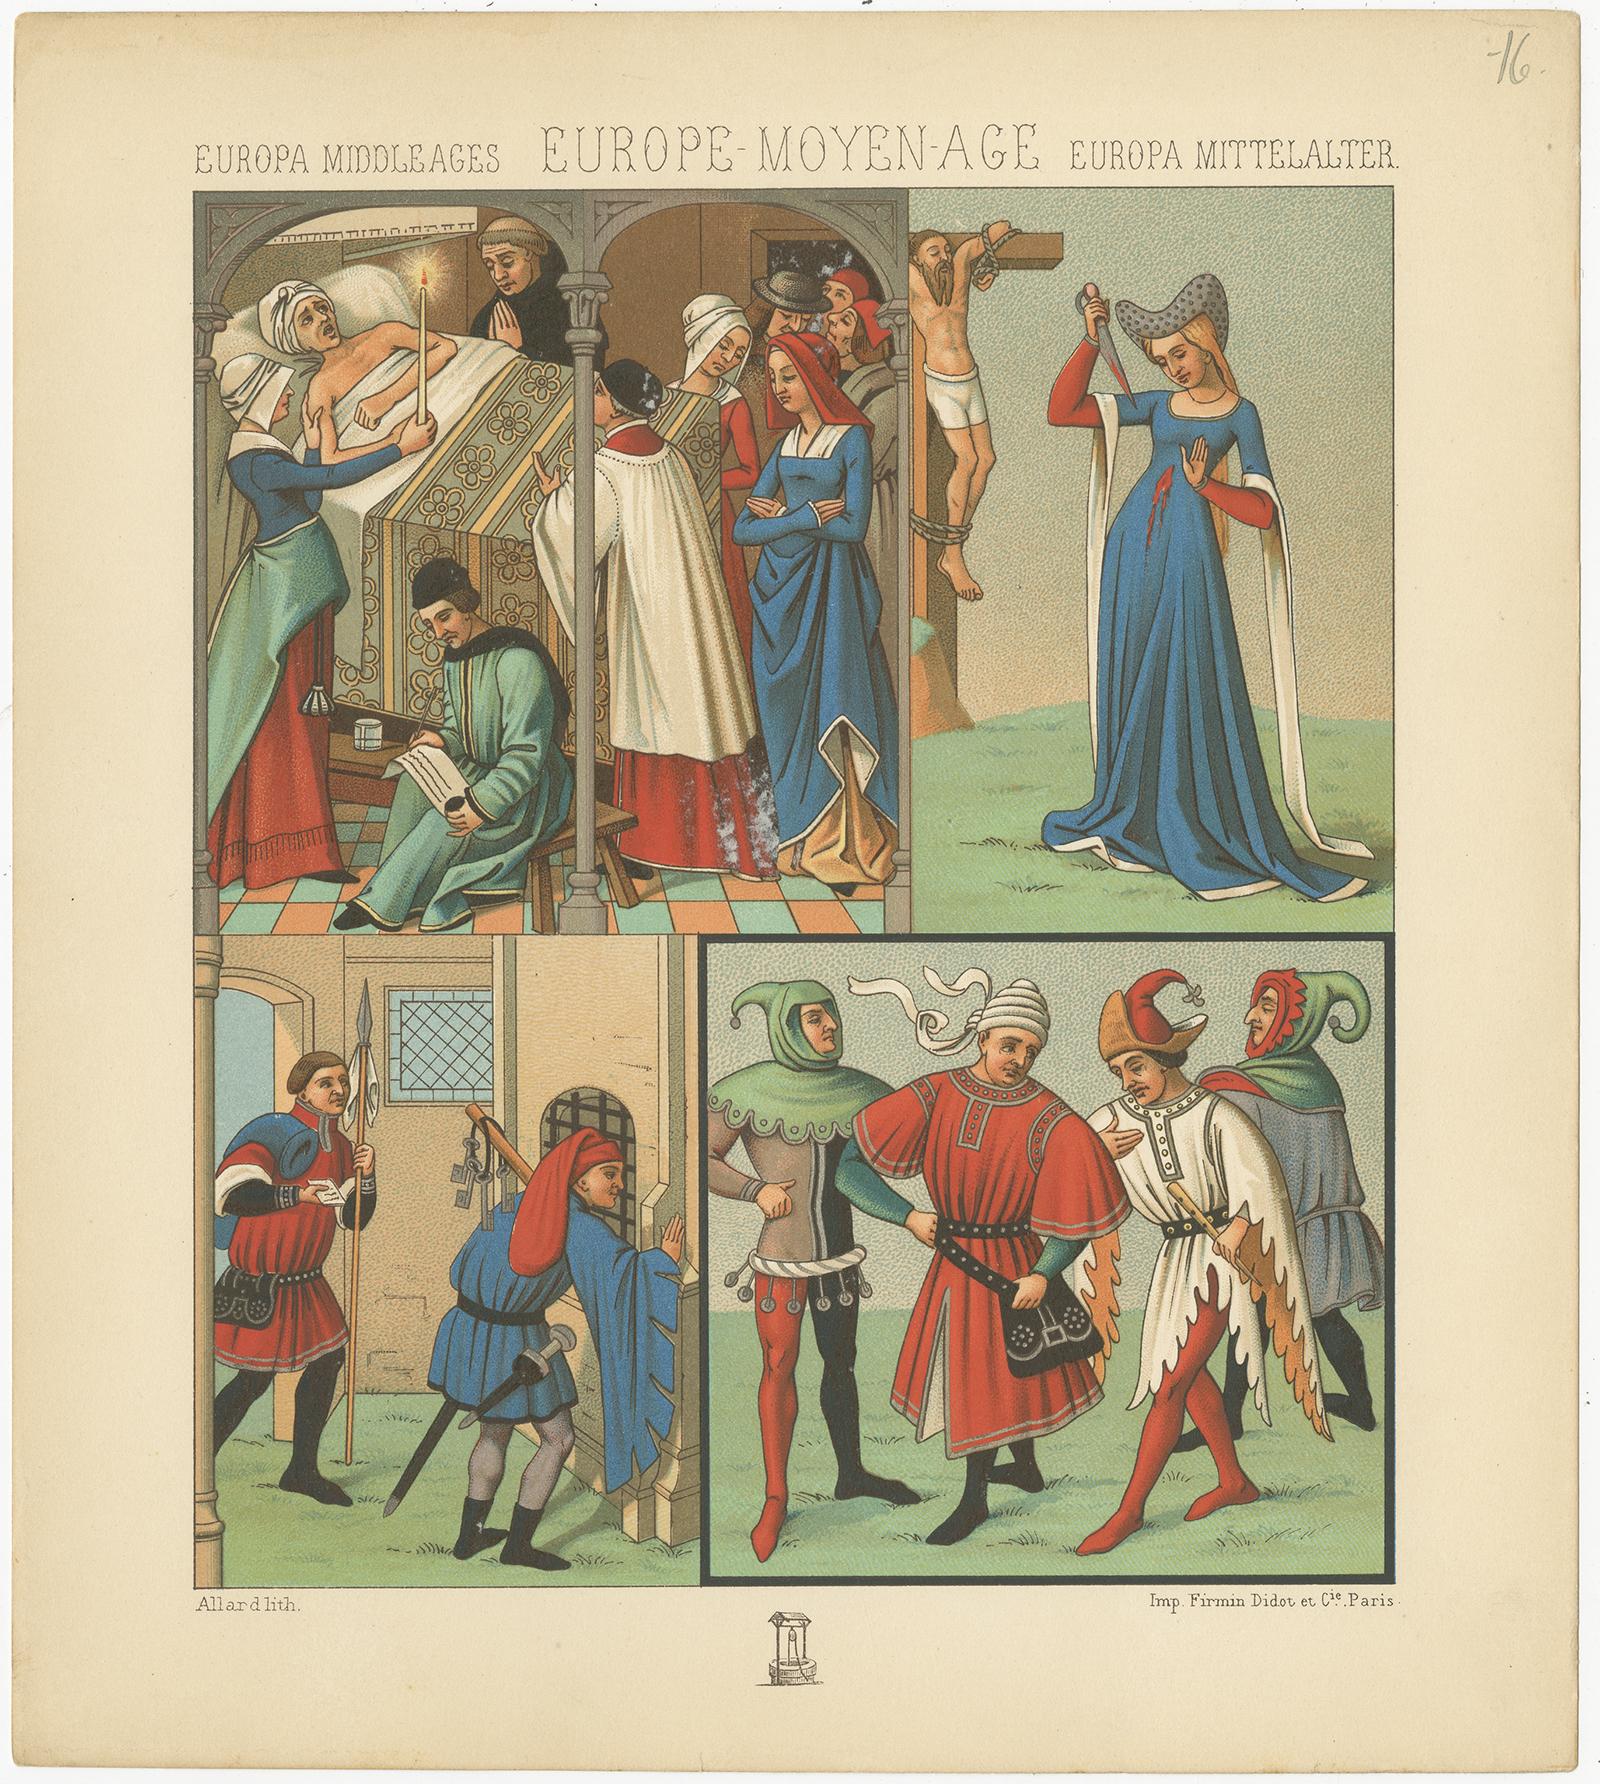 Antique print titled 'Europa Middle Ages - Europe Moyen Age - Europa Mittelalter'. Chromolithograph of European Scenes. This print originates from 'Le Costume Historique' by M.A. Racinet. Published, circa 1880.